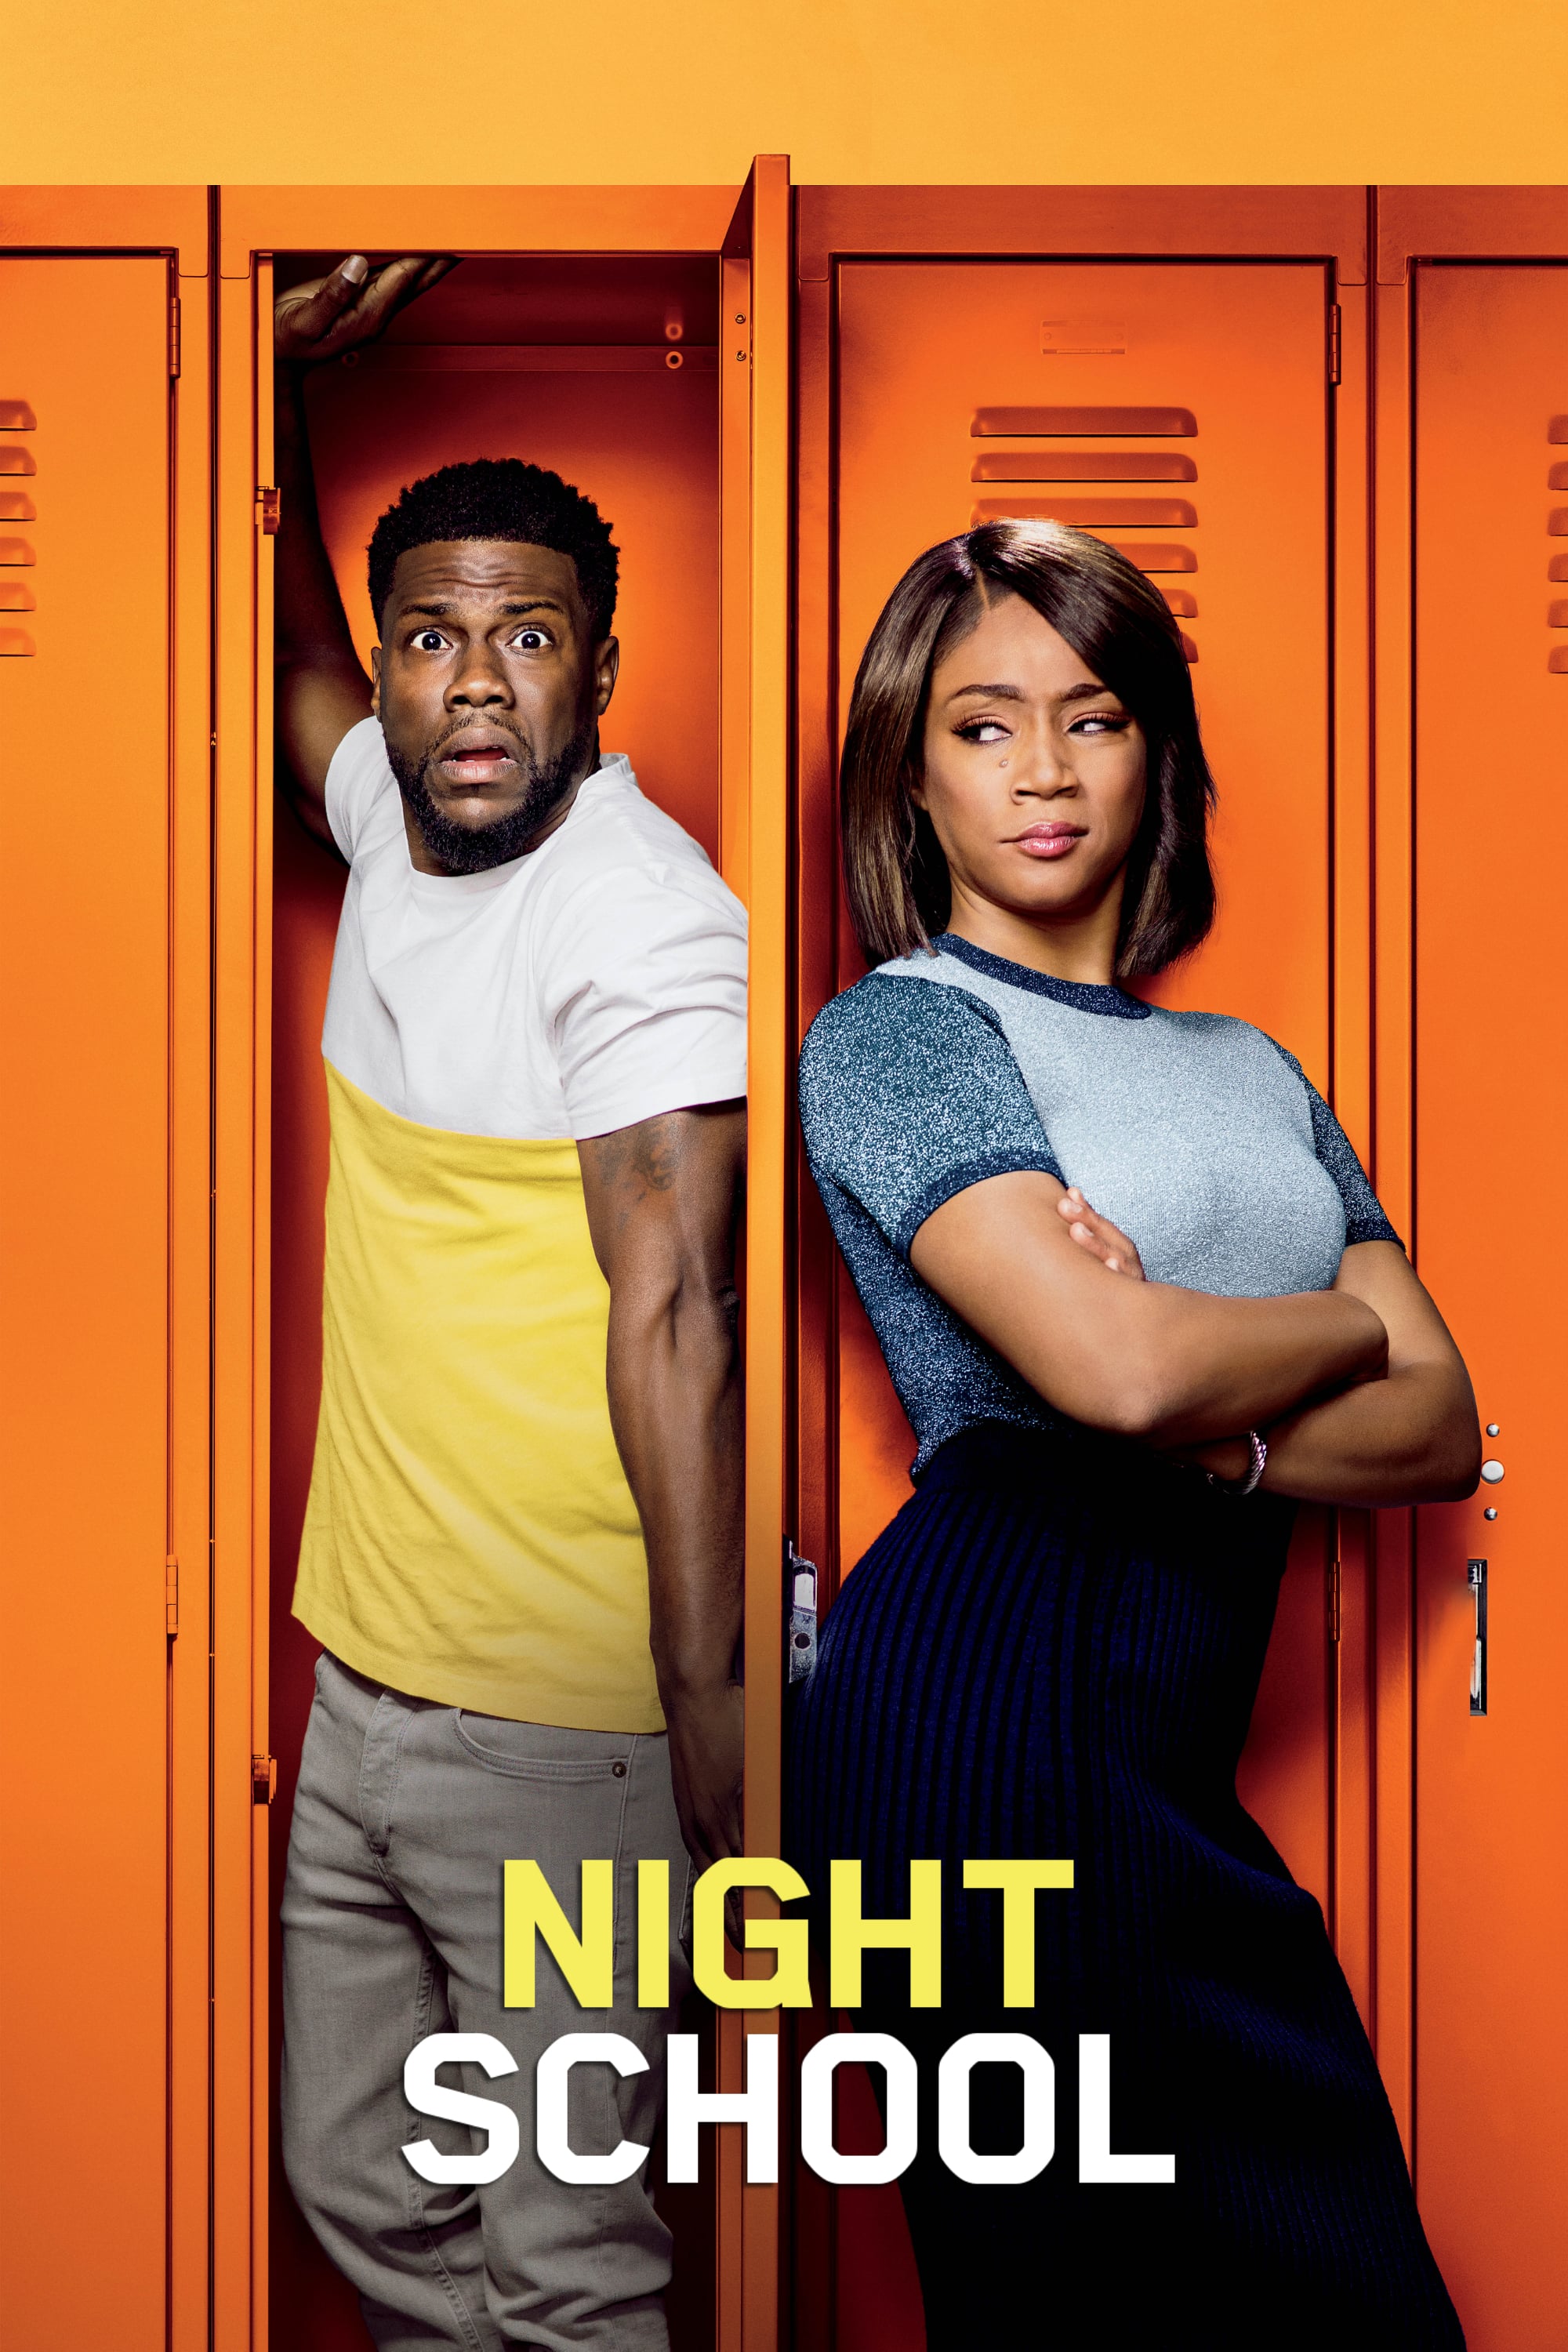 Poster for the movie "Night School"